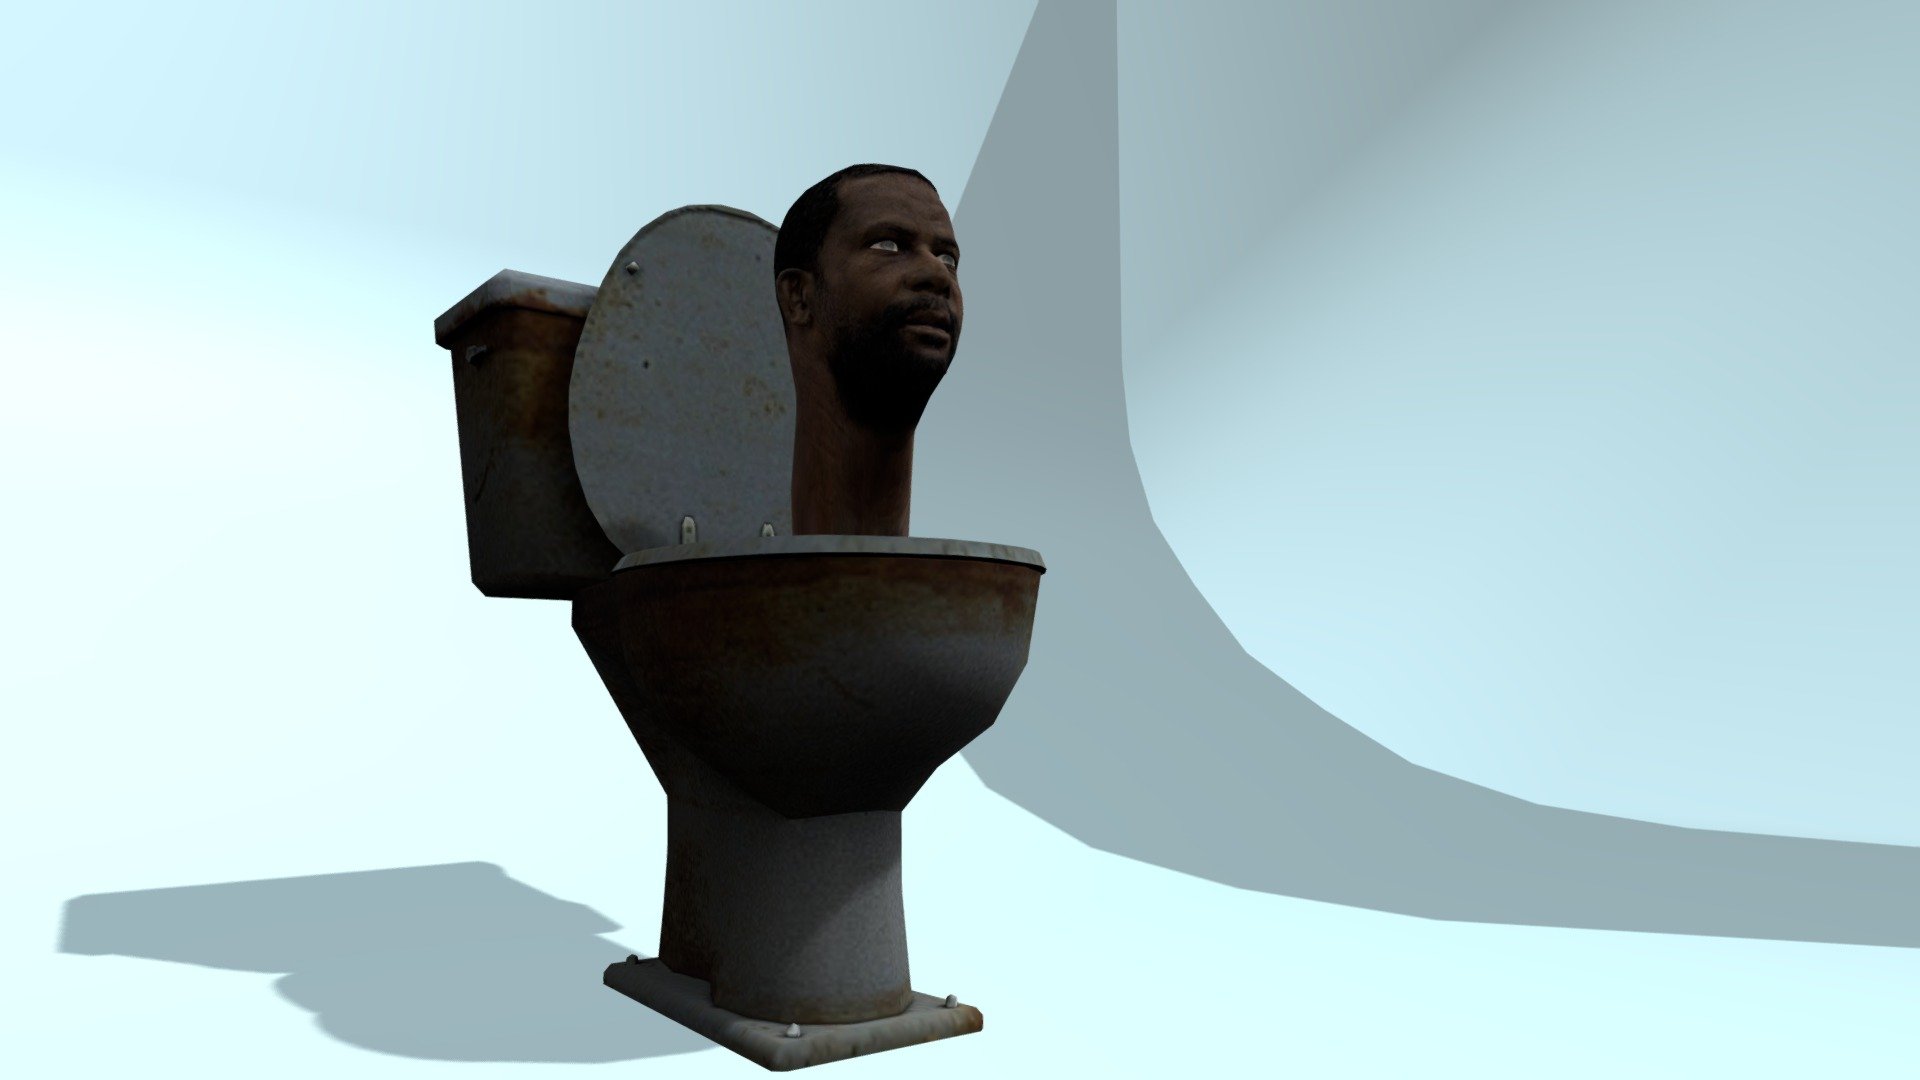 Toilet man from skibidi toilet meme from youtube,the model is fully rigged and ready to animate.
the face is rigged with keymapped and the body with bones.
feel free to ask me any thing.
be creative with it and enjoy !! - skibidi toilet (toilet man) - Download Free 3D model by Mostafa Ebrahim (@mostafaebrahiem1998) 3d model